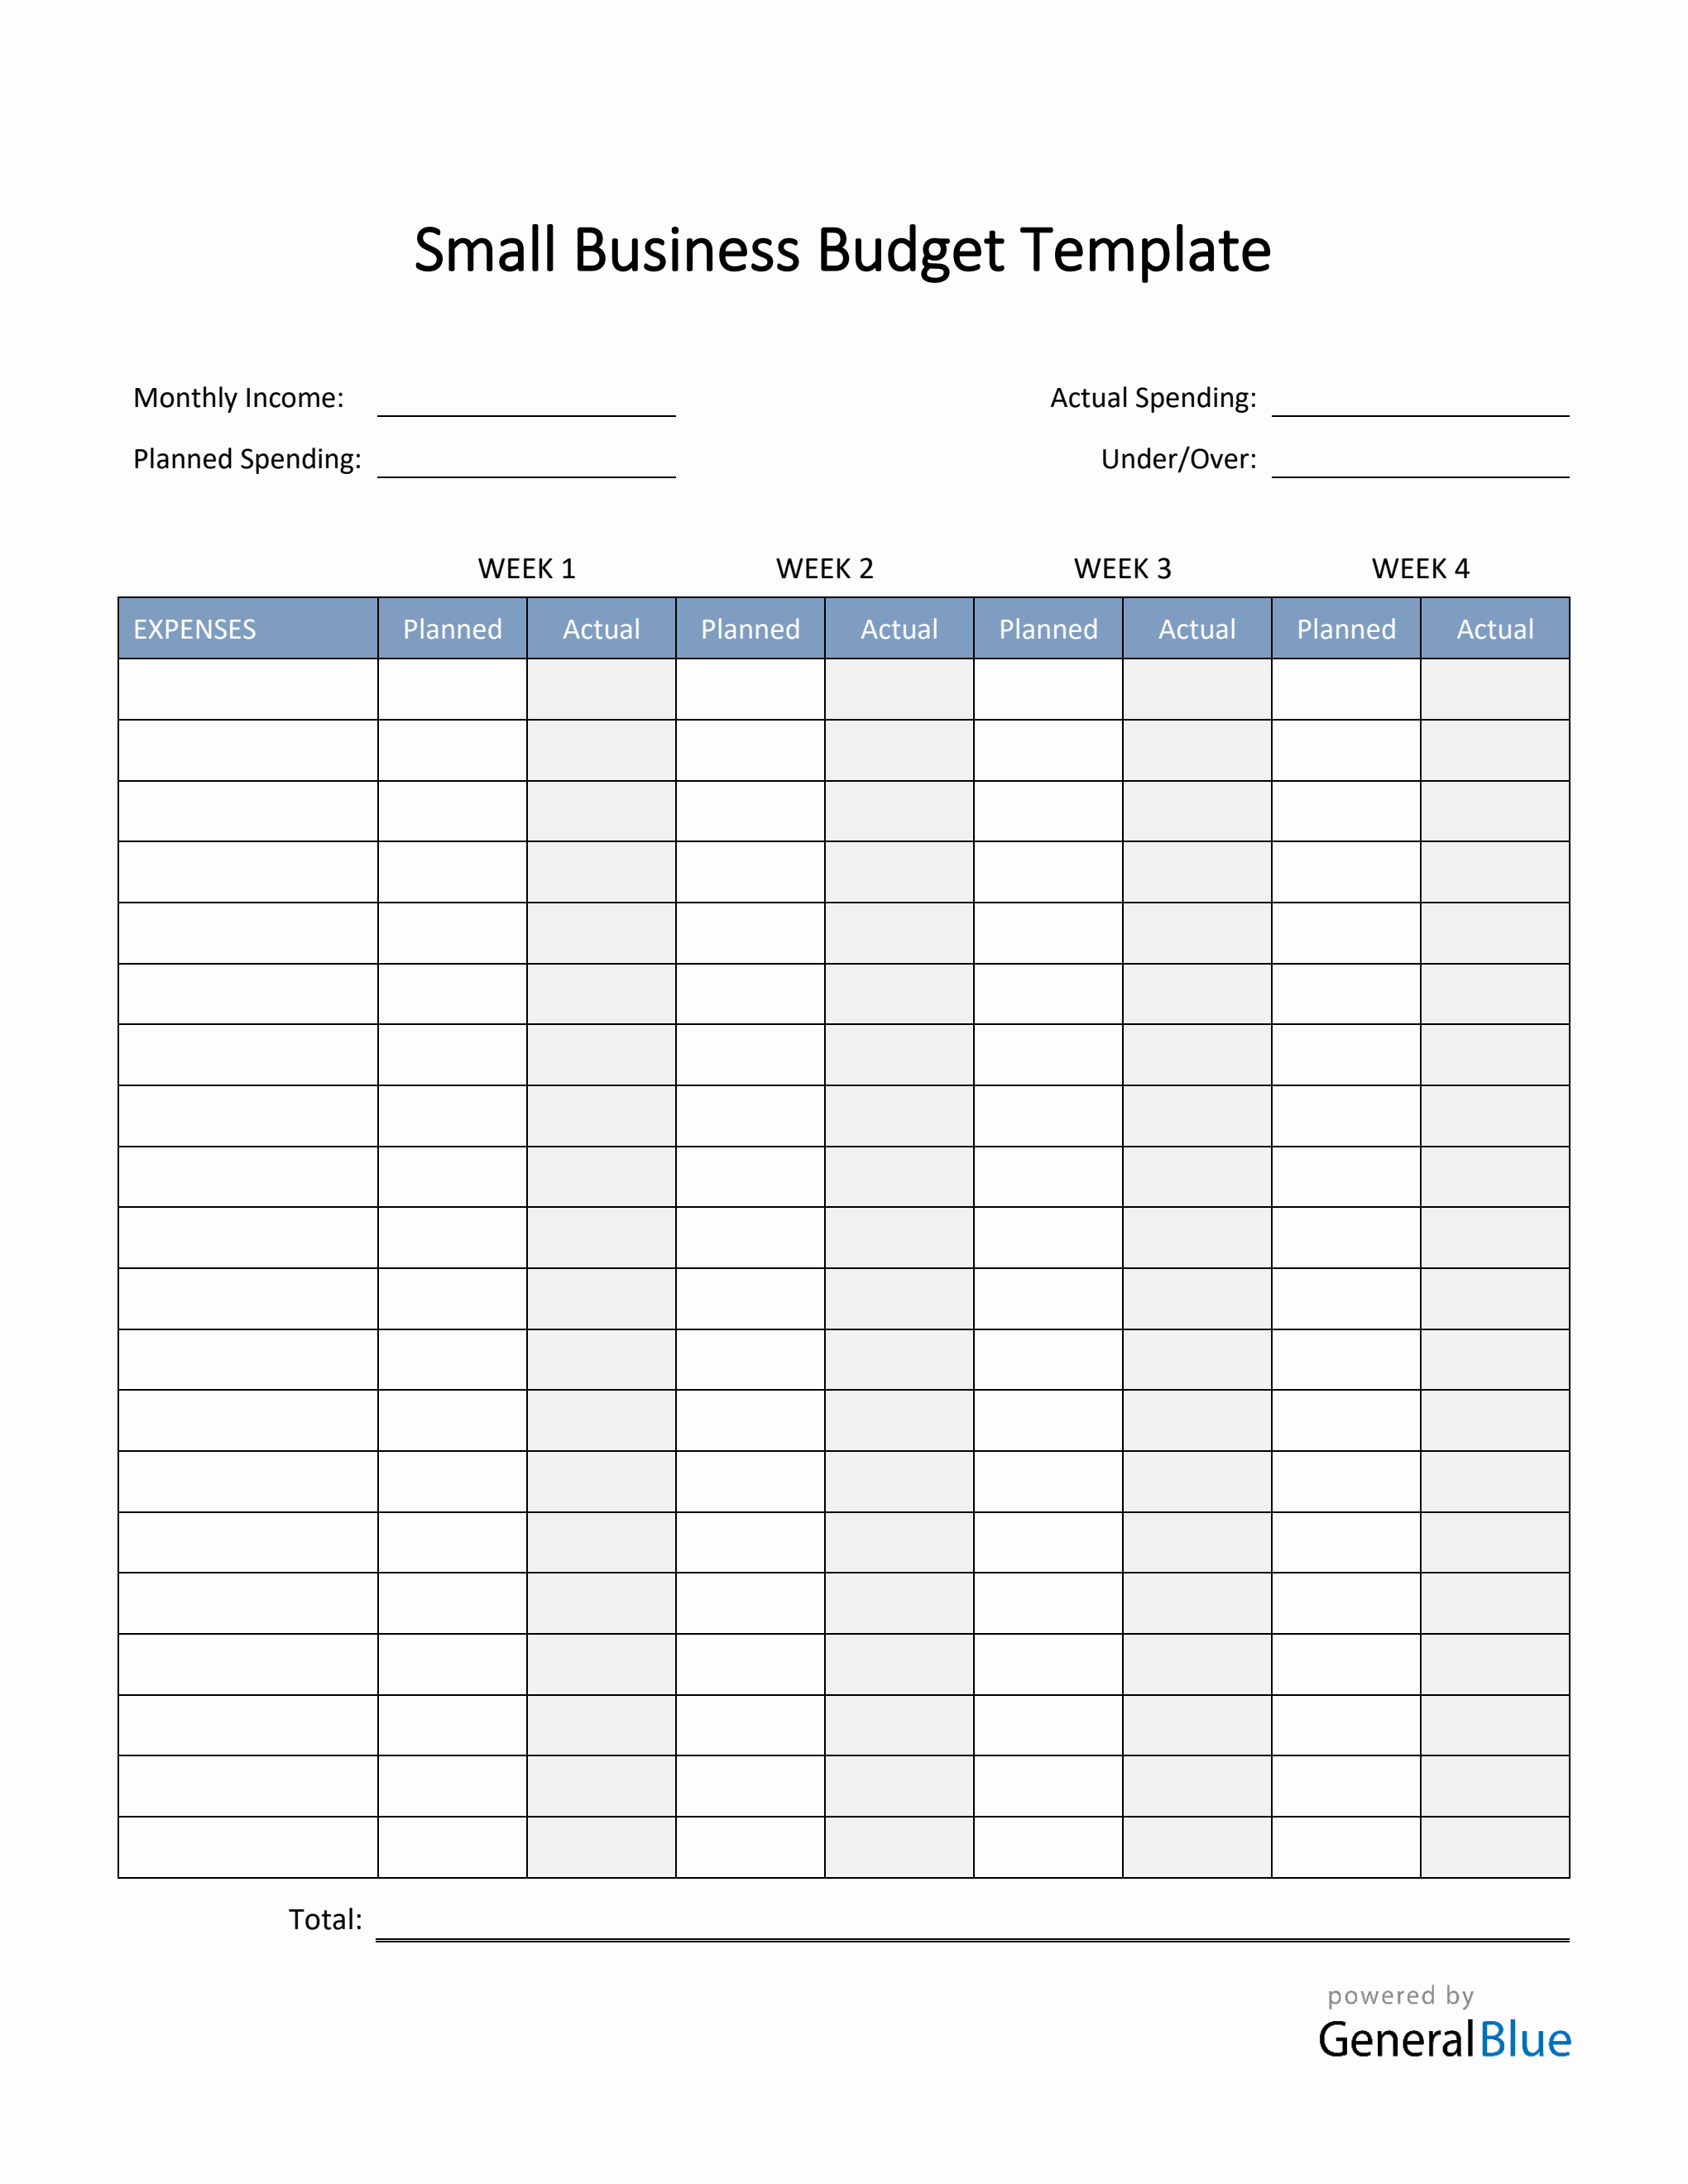 small-business-budget-template-in-pdf-basic